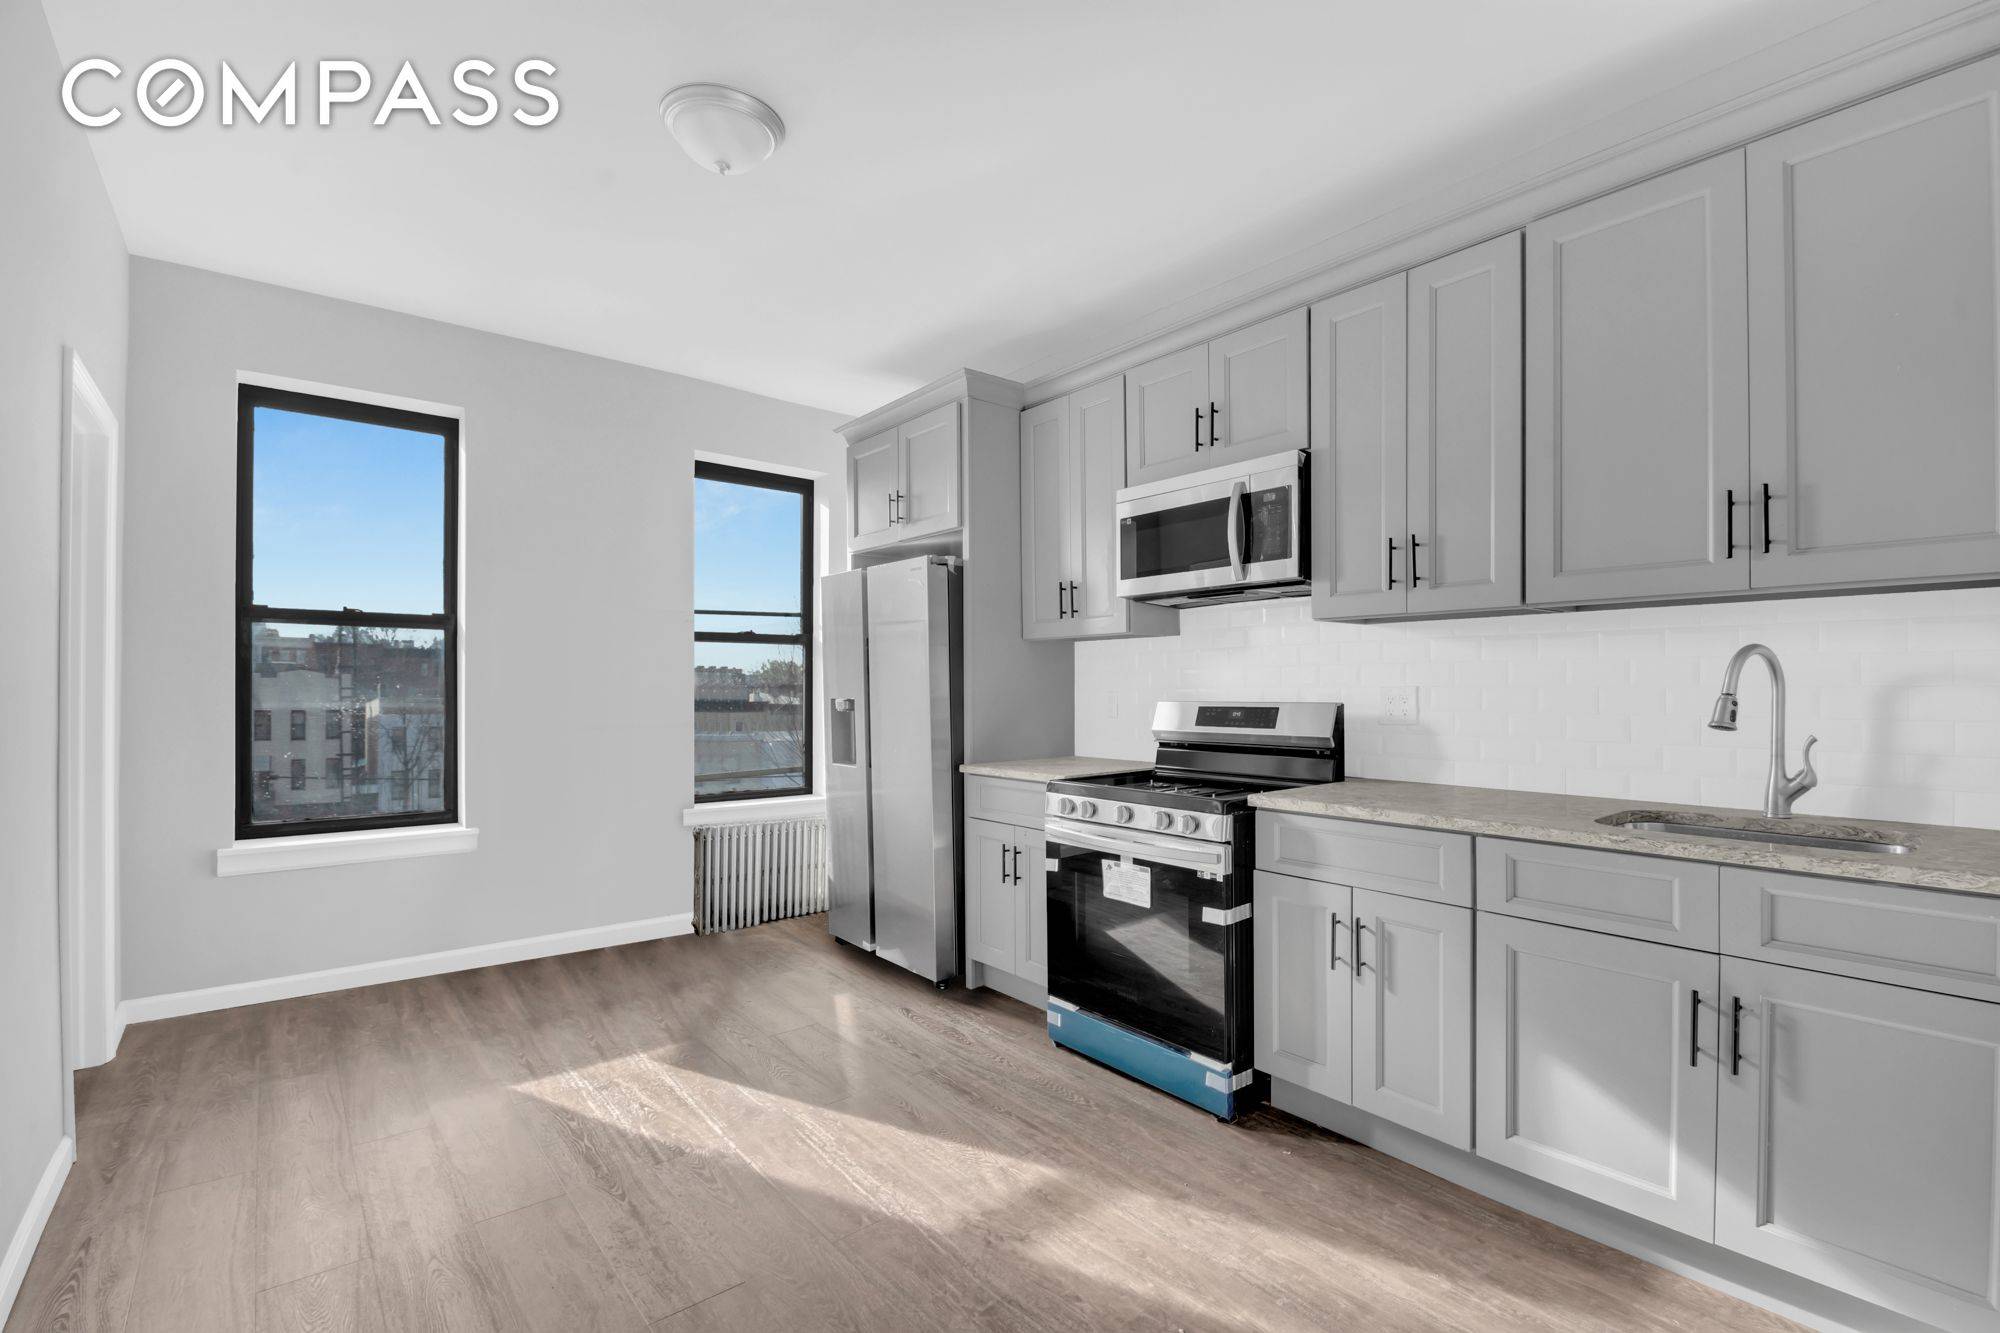 Welcome home to this two bedroom, newly renovated apartment.